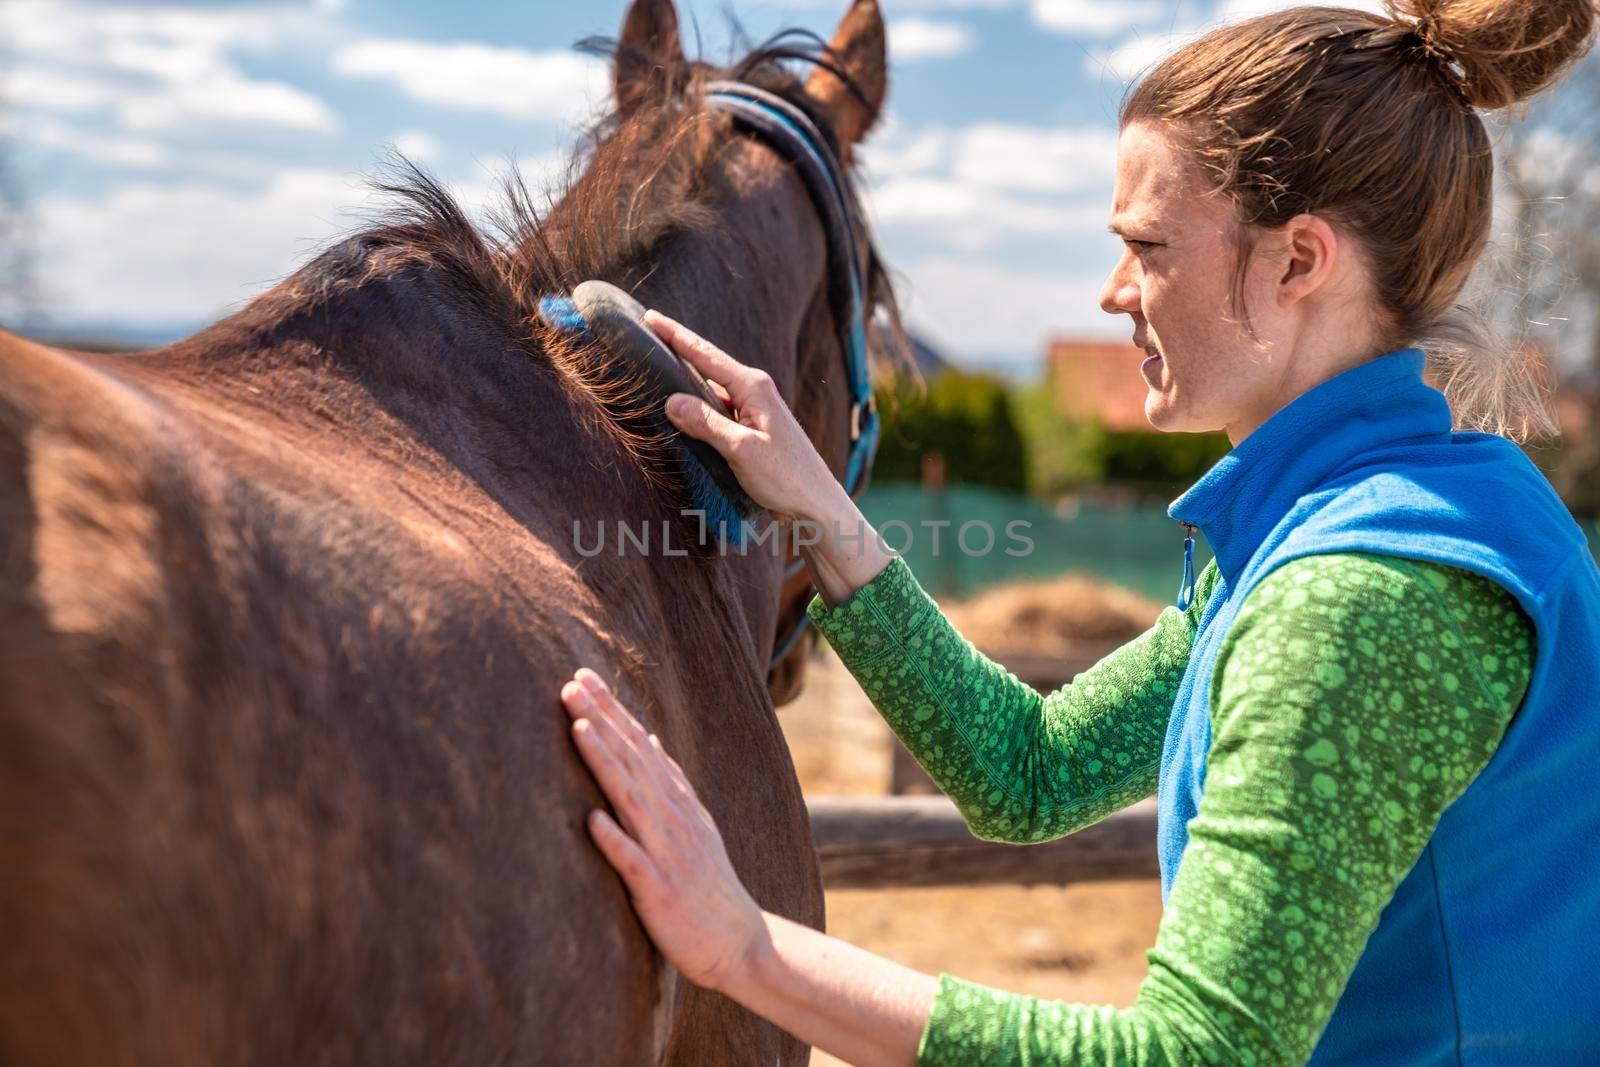 cleaning a horse with a brush on a farm by a young woman.